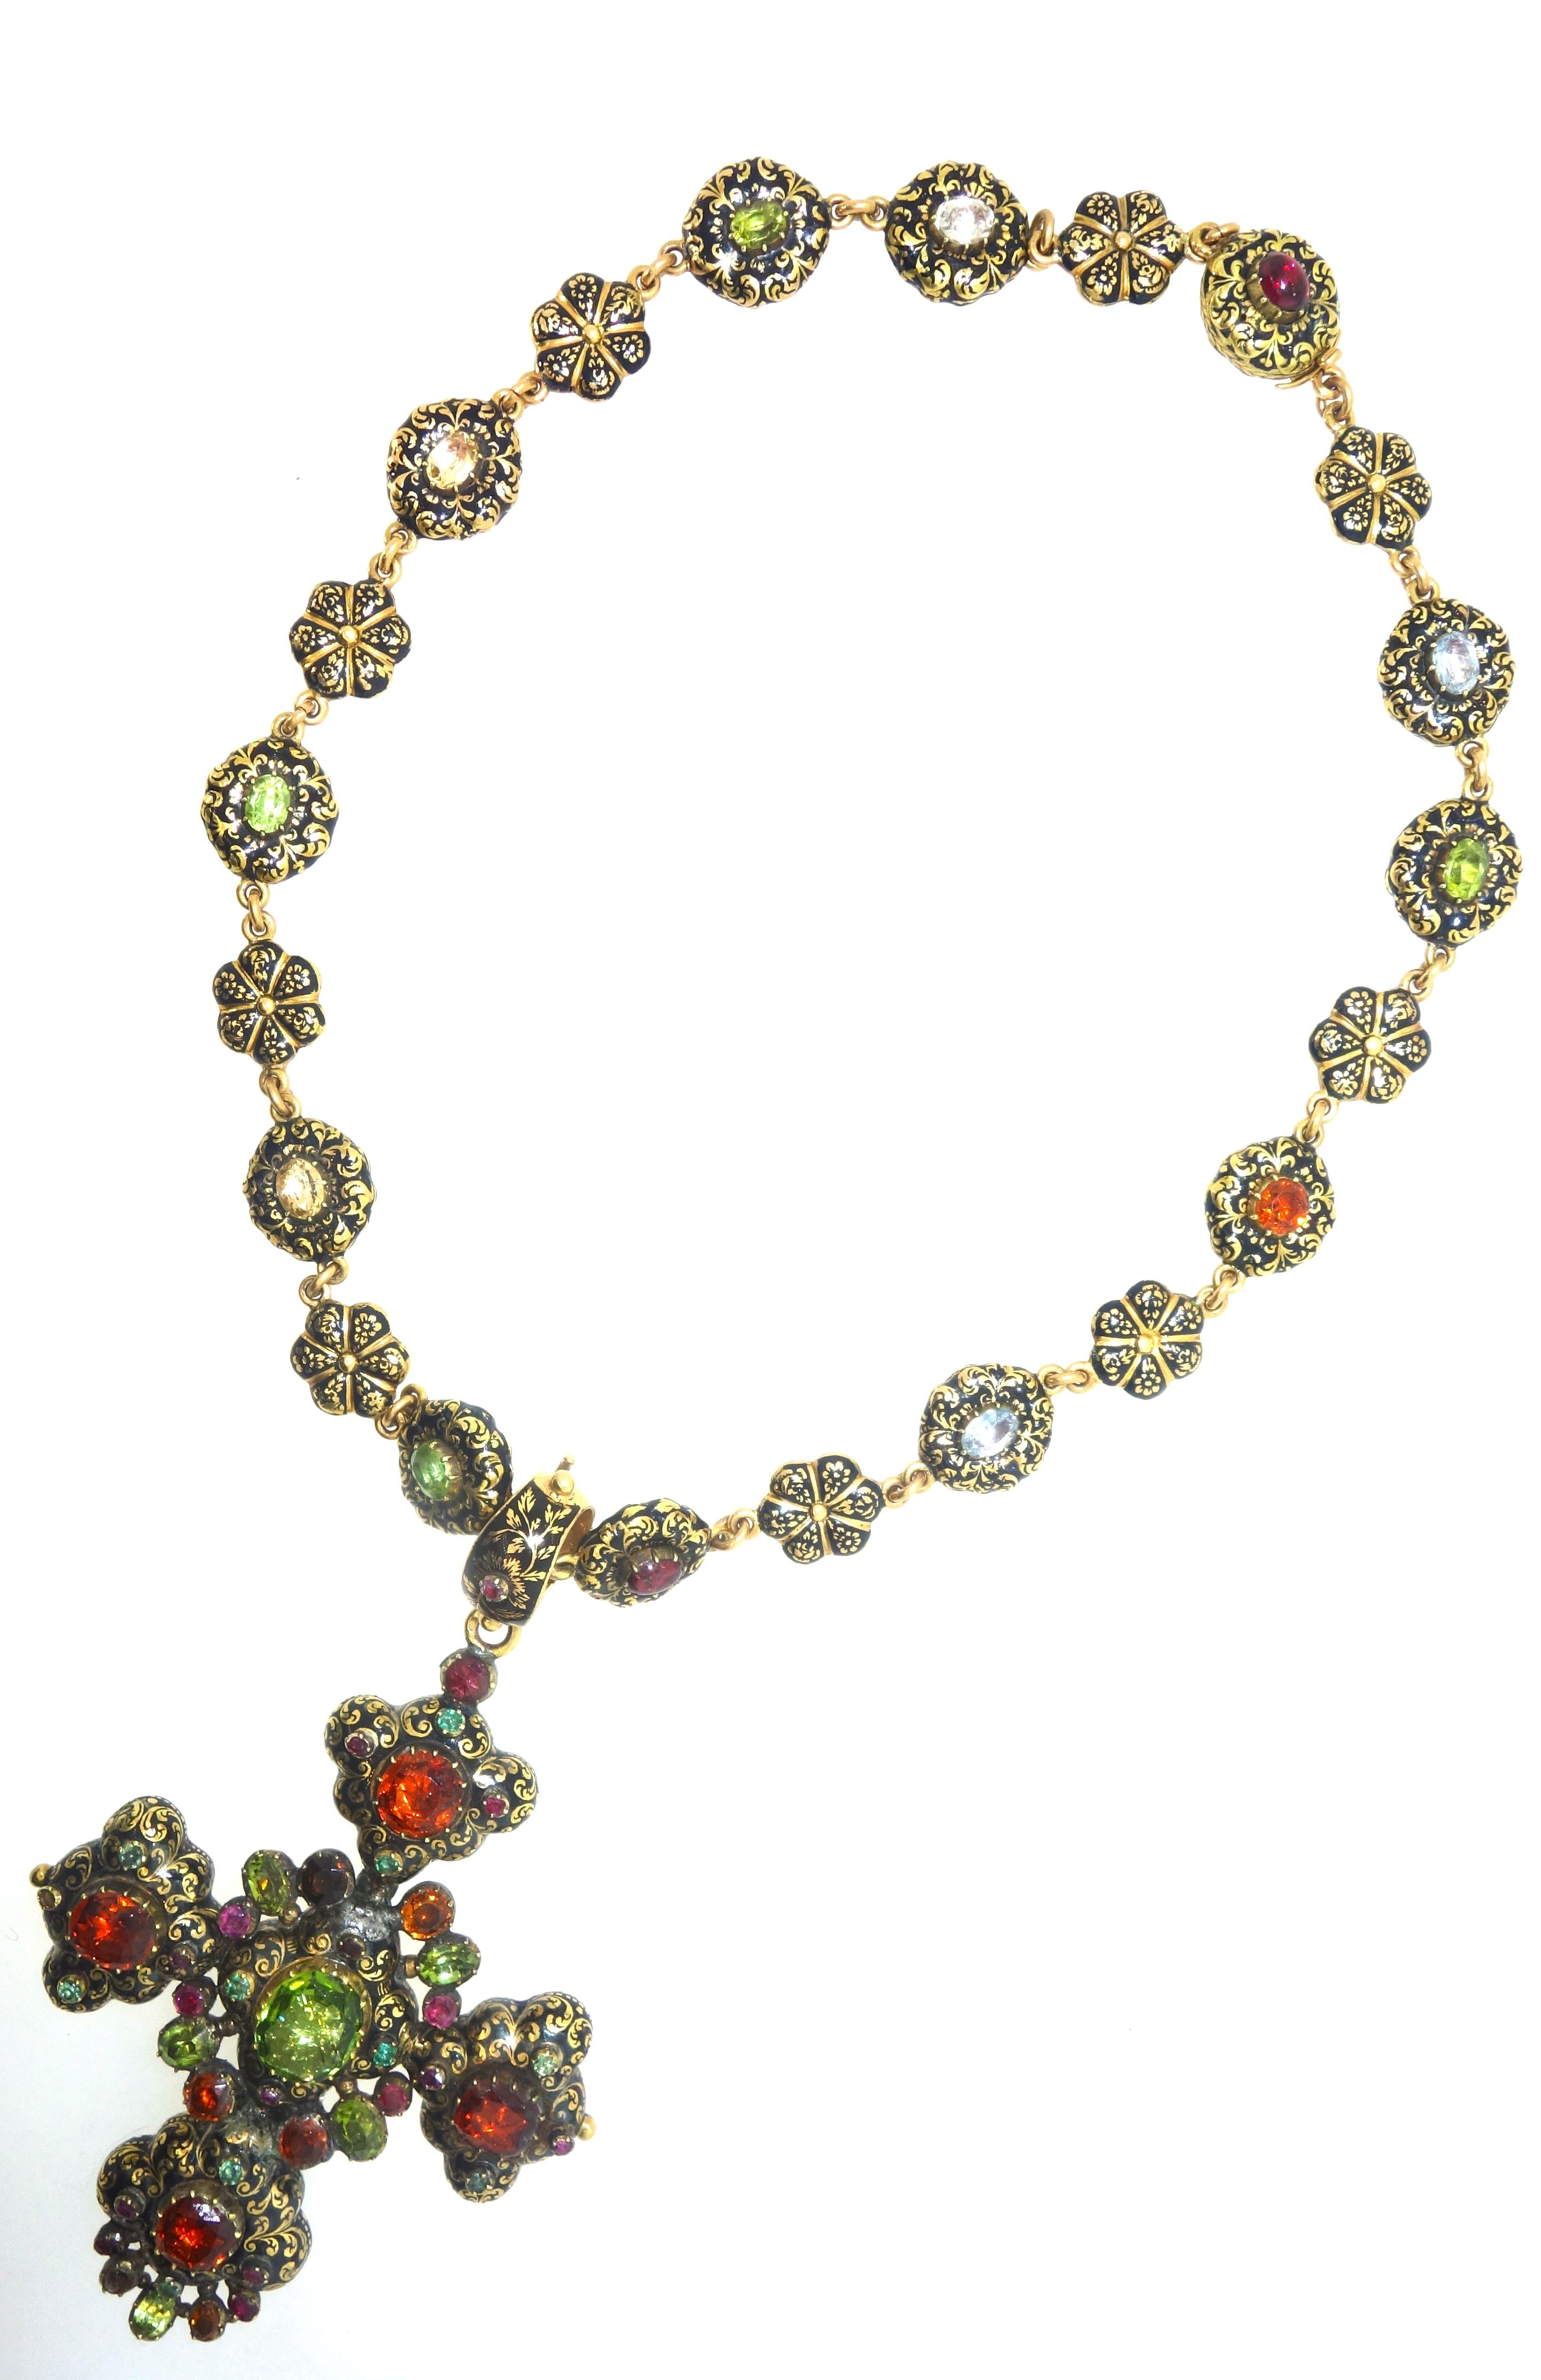 Victorian enamel chain with natural stones, peridot, garnet and aquamarines set (foil-back) throughout.  The enamel, referred to as Swiss enamel, creates an almost three dimensional quality to this pendant and necklace.  The back of the necklace and